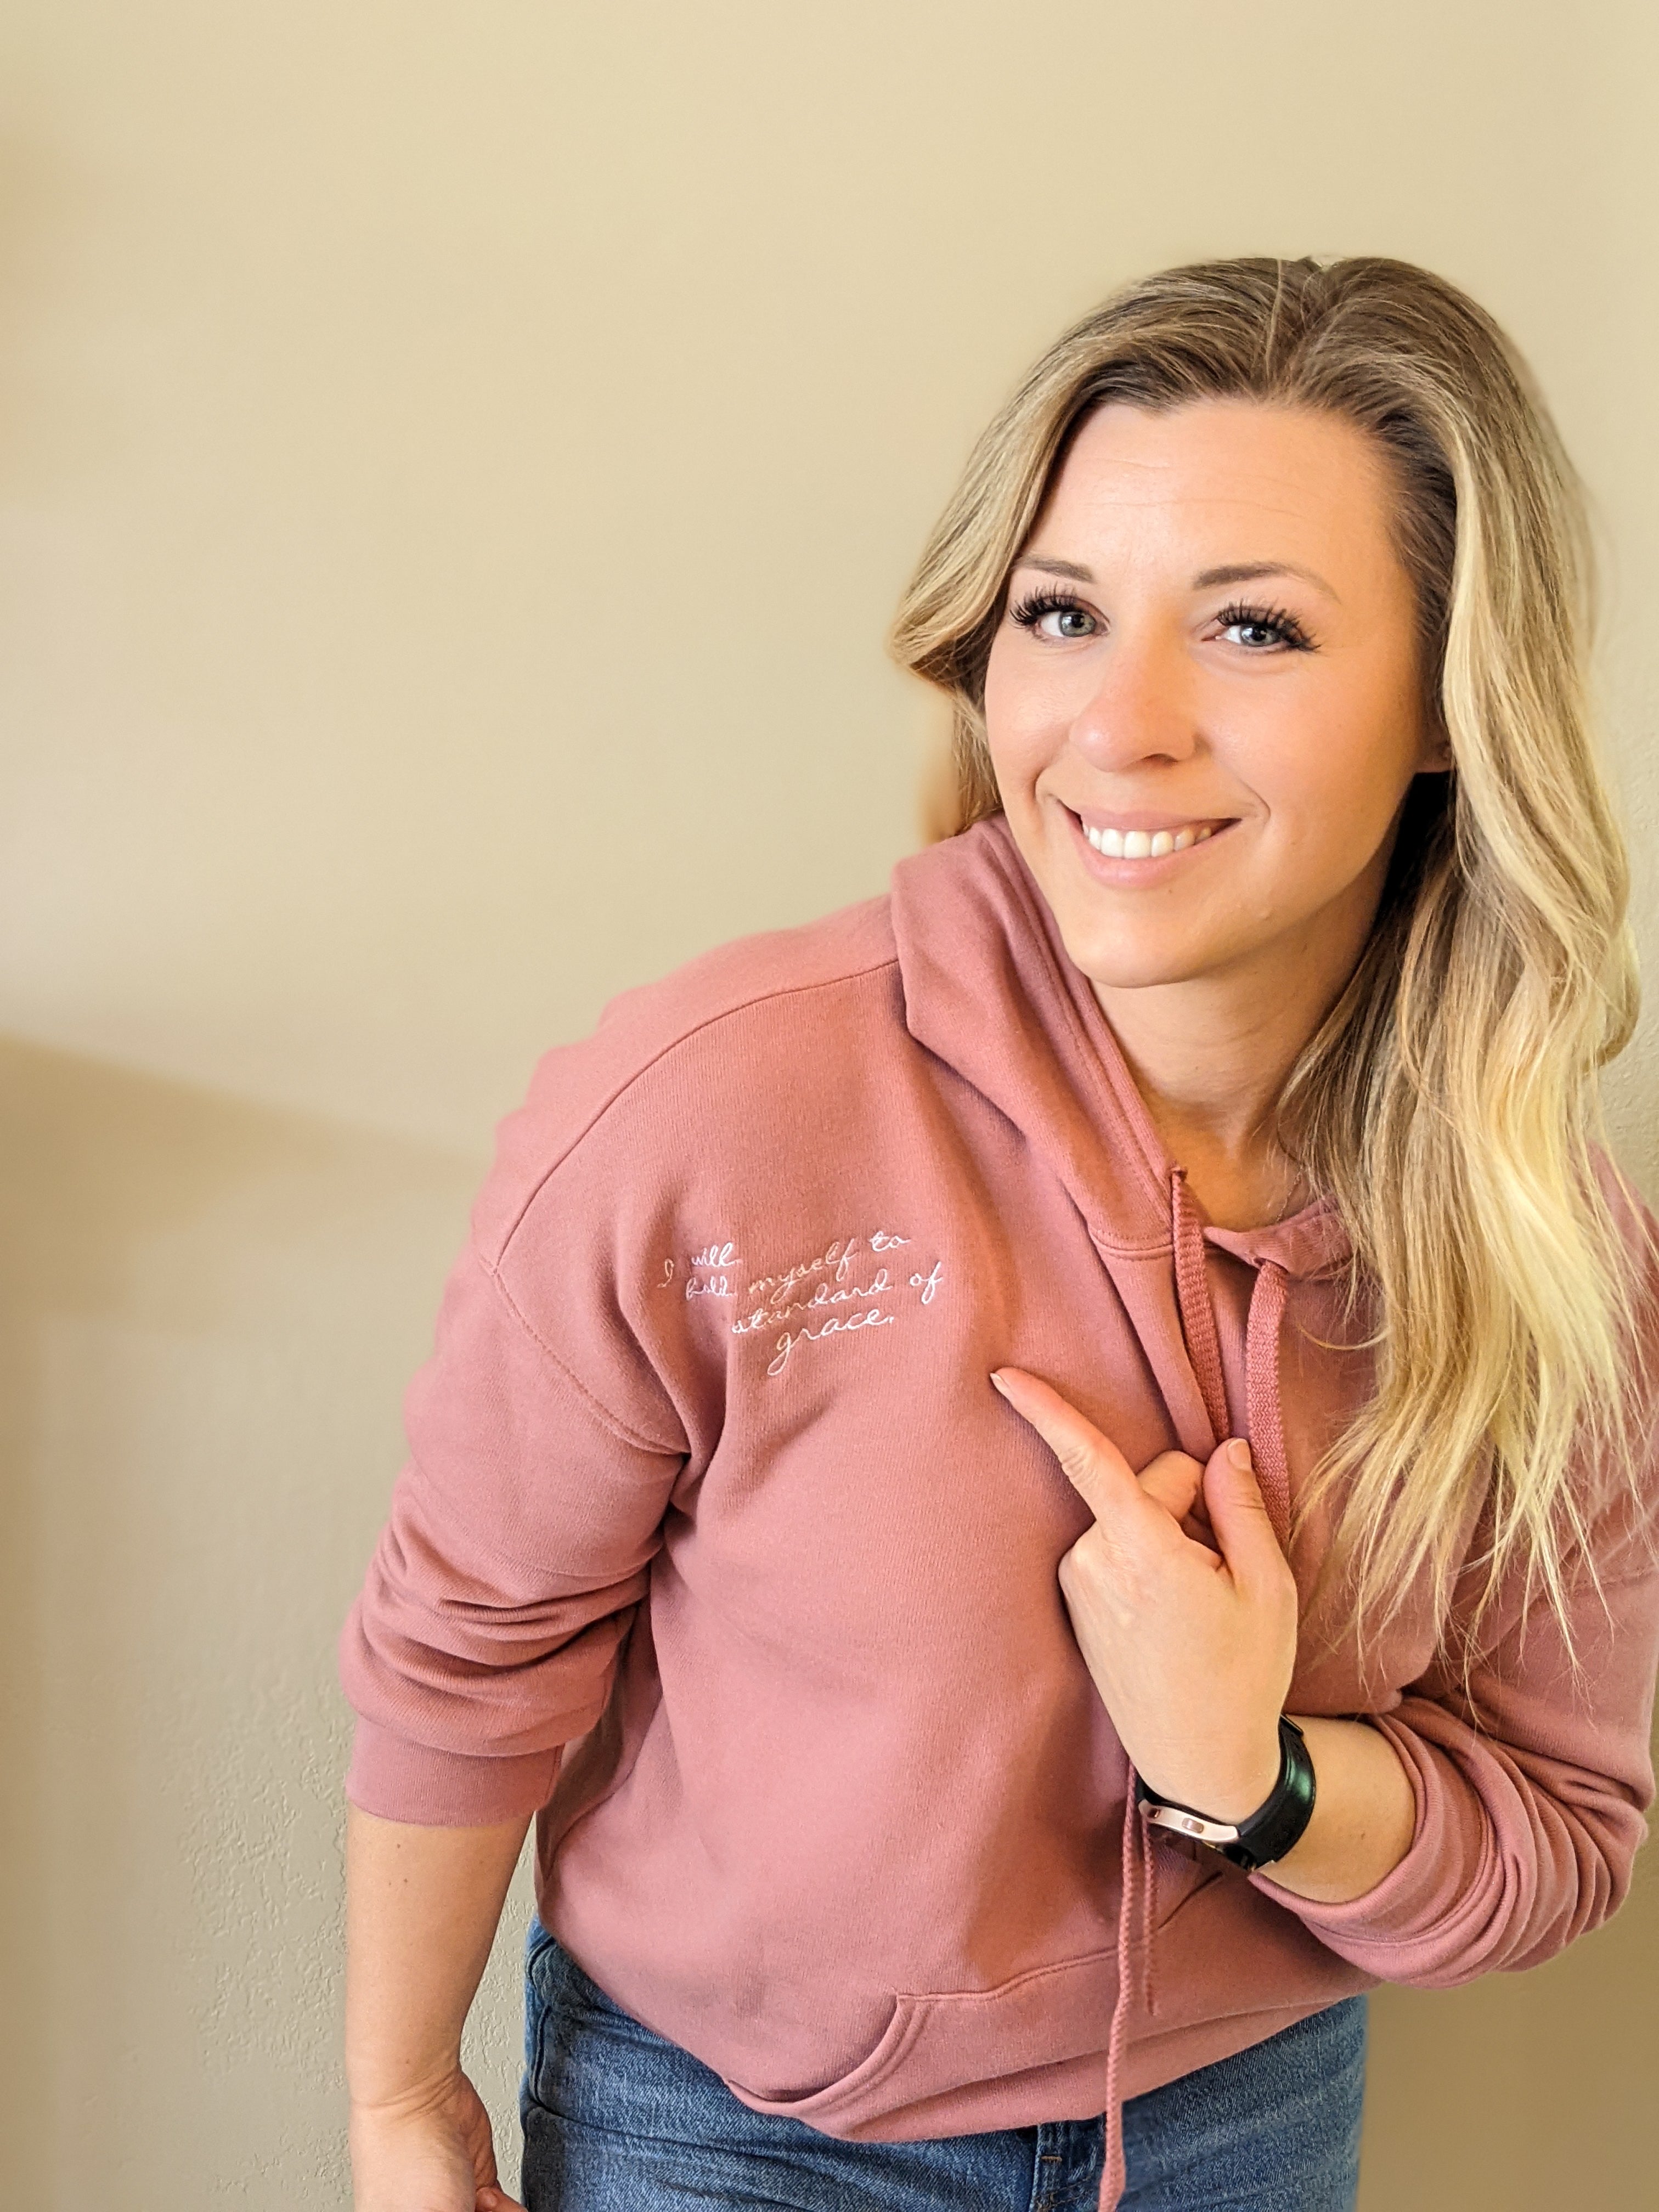 READY-TO-SHIP *NEW* embroidered Mauve Hoodie- multiple sizes